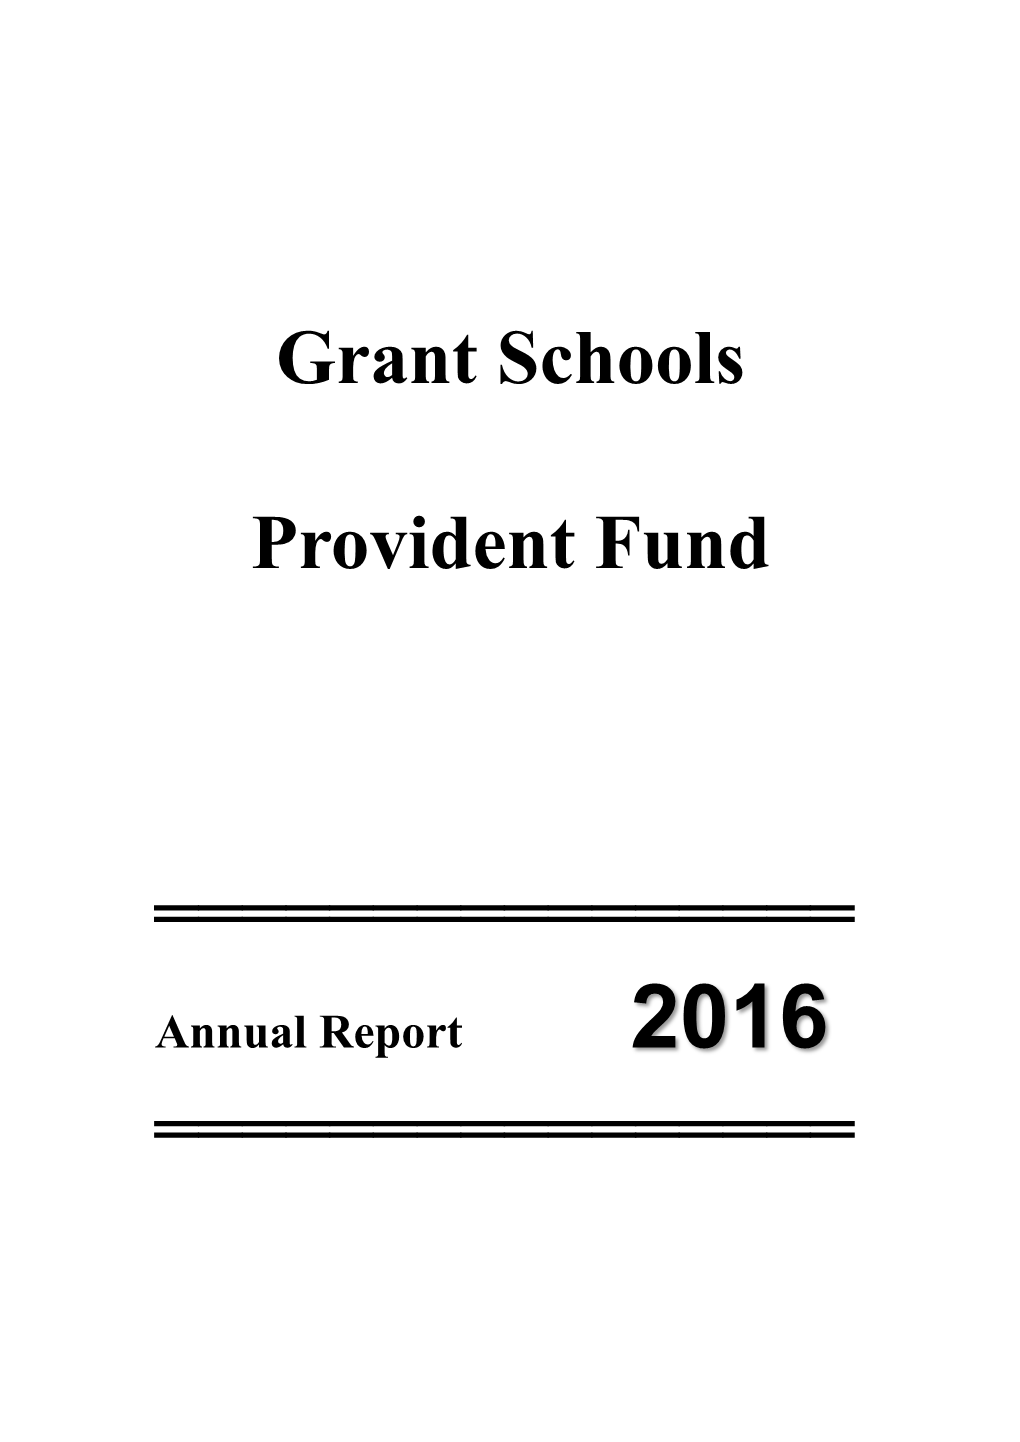 Grant Schools Provident Fund (The Fund) Is Governed by the Grant Schools Provident Fund Rules Under Section 85 of the Education Ordinance (Cap